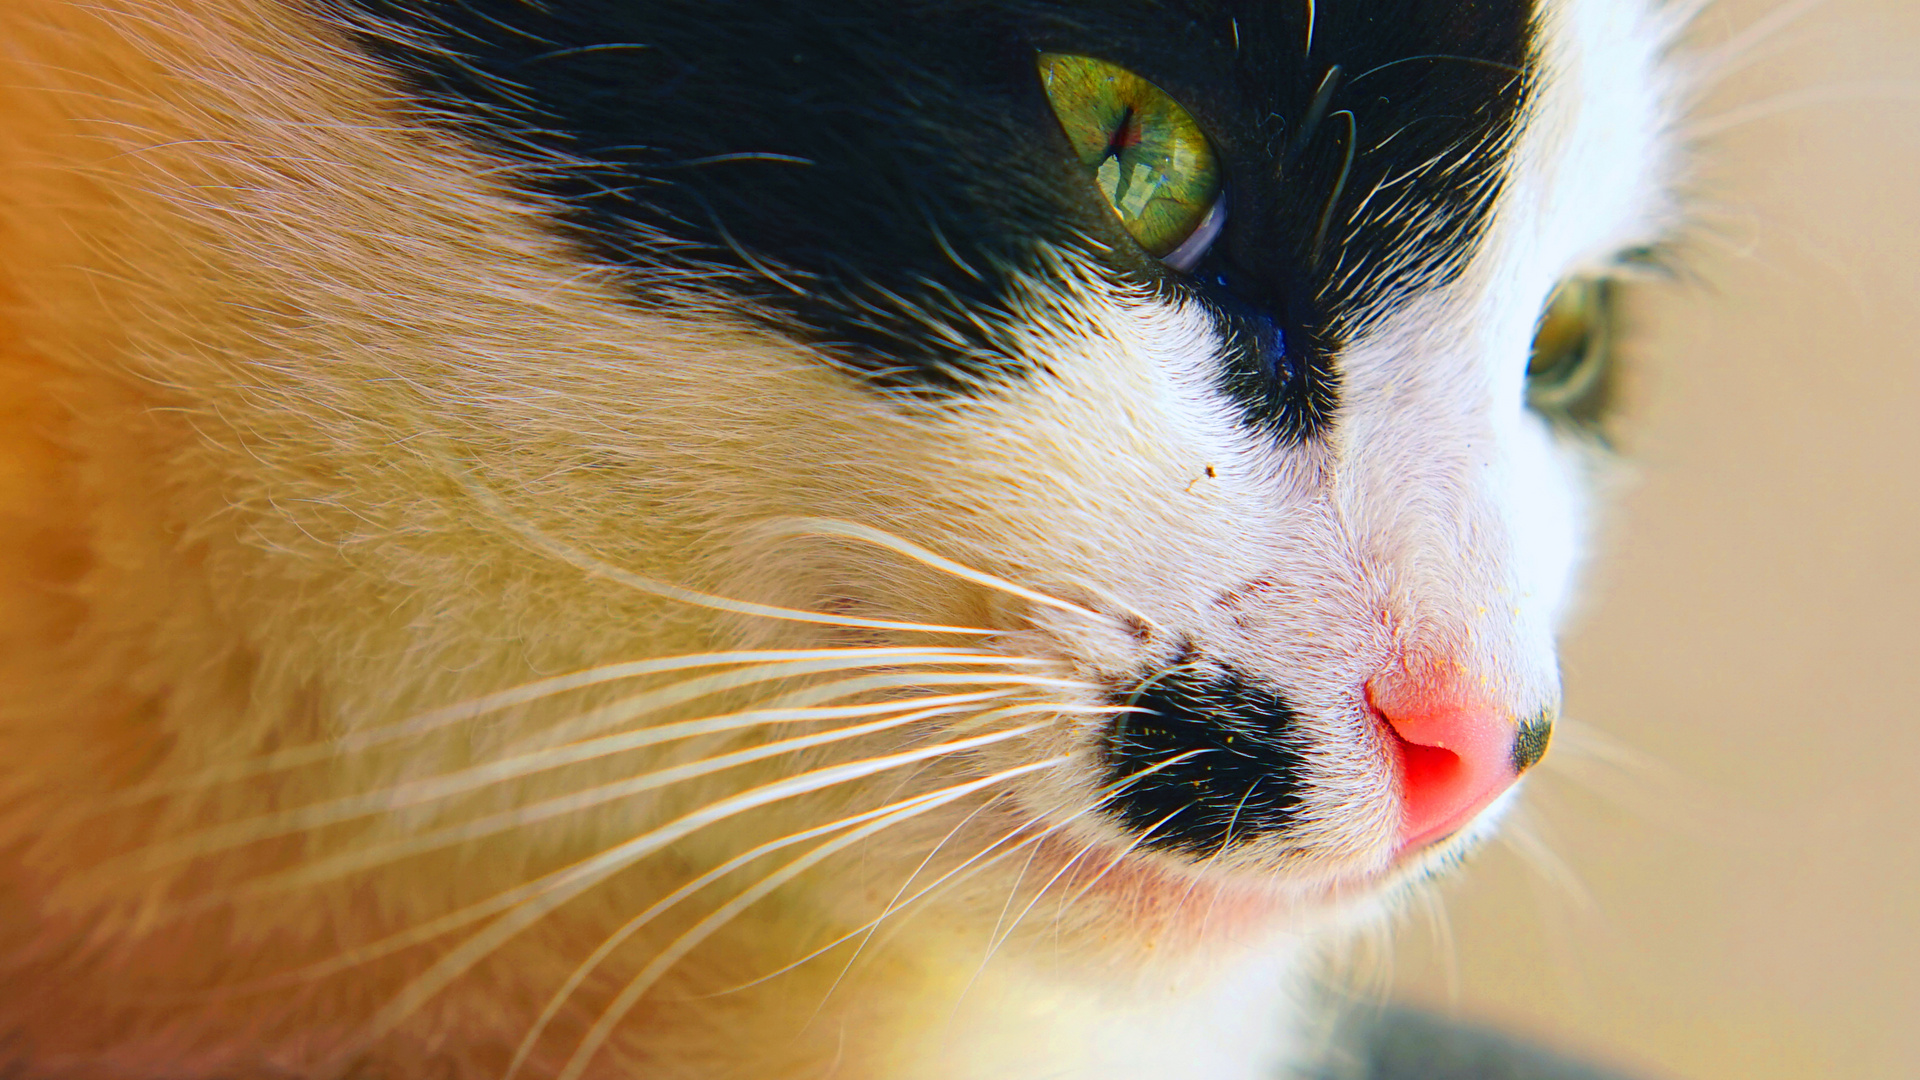 Flower Pollen on the Cat nose